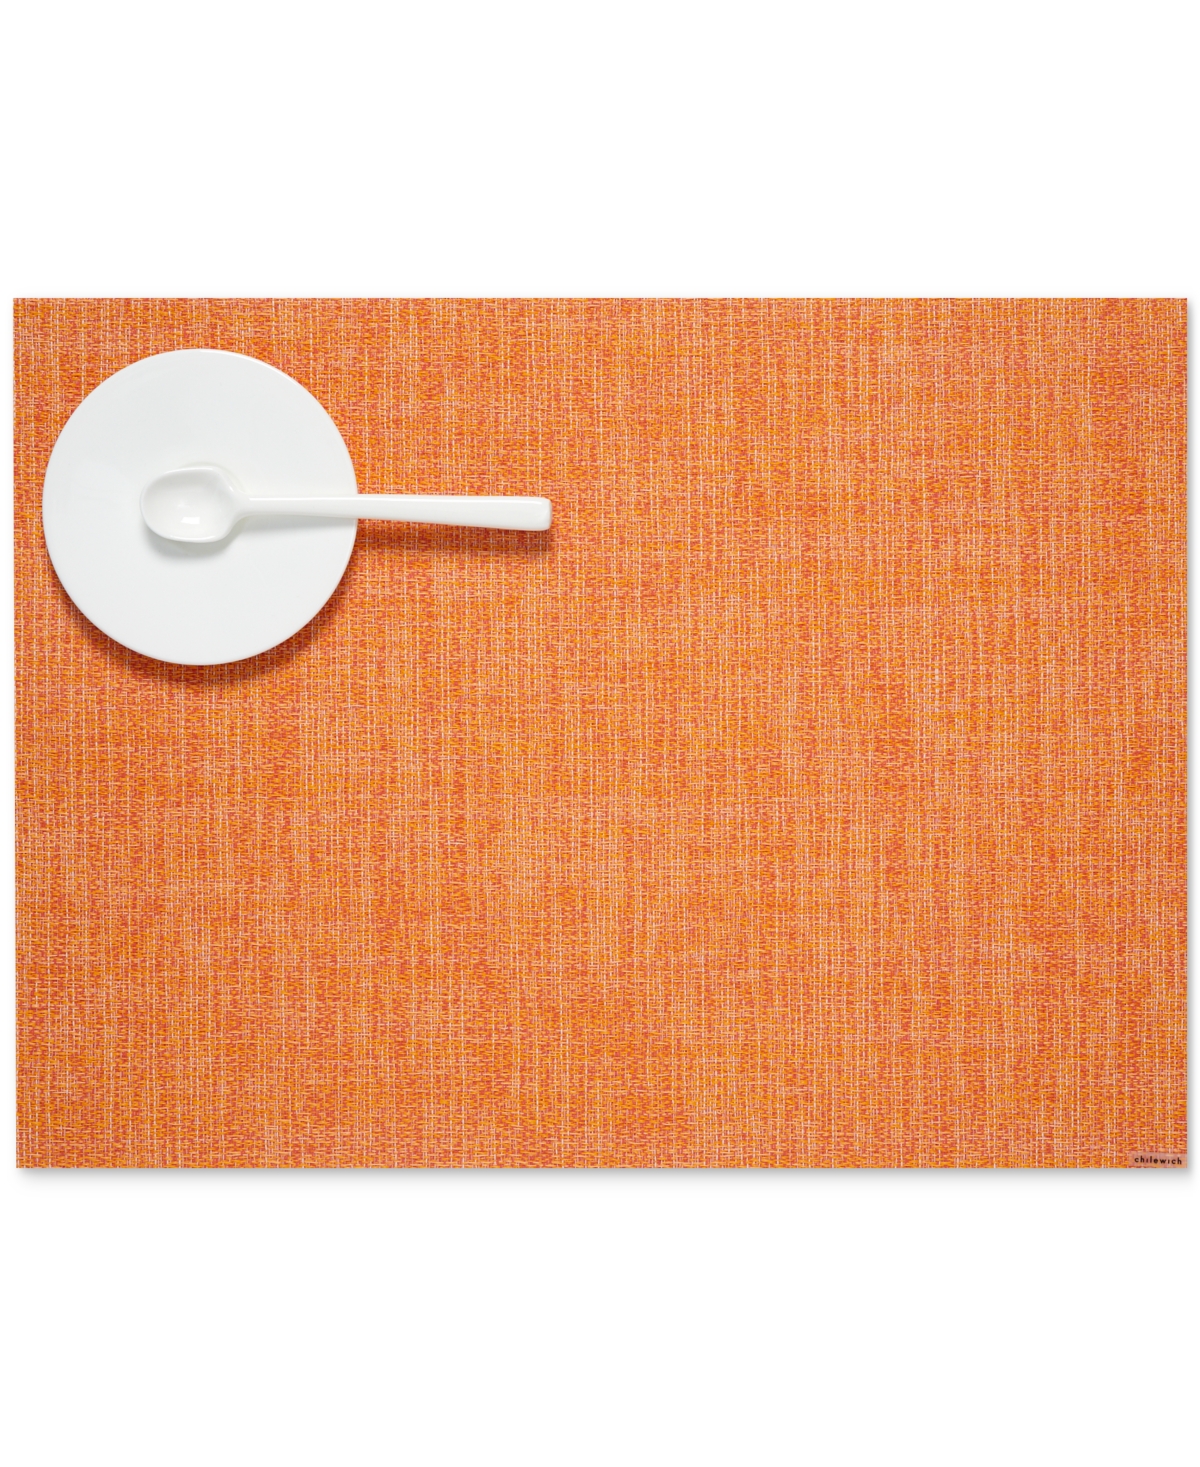 15795762 Chilewich Boucle Placemat sku 15795762